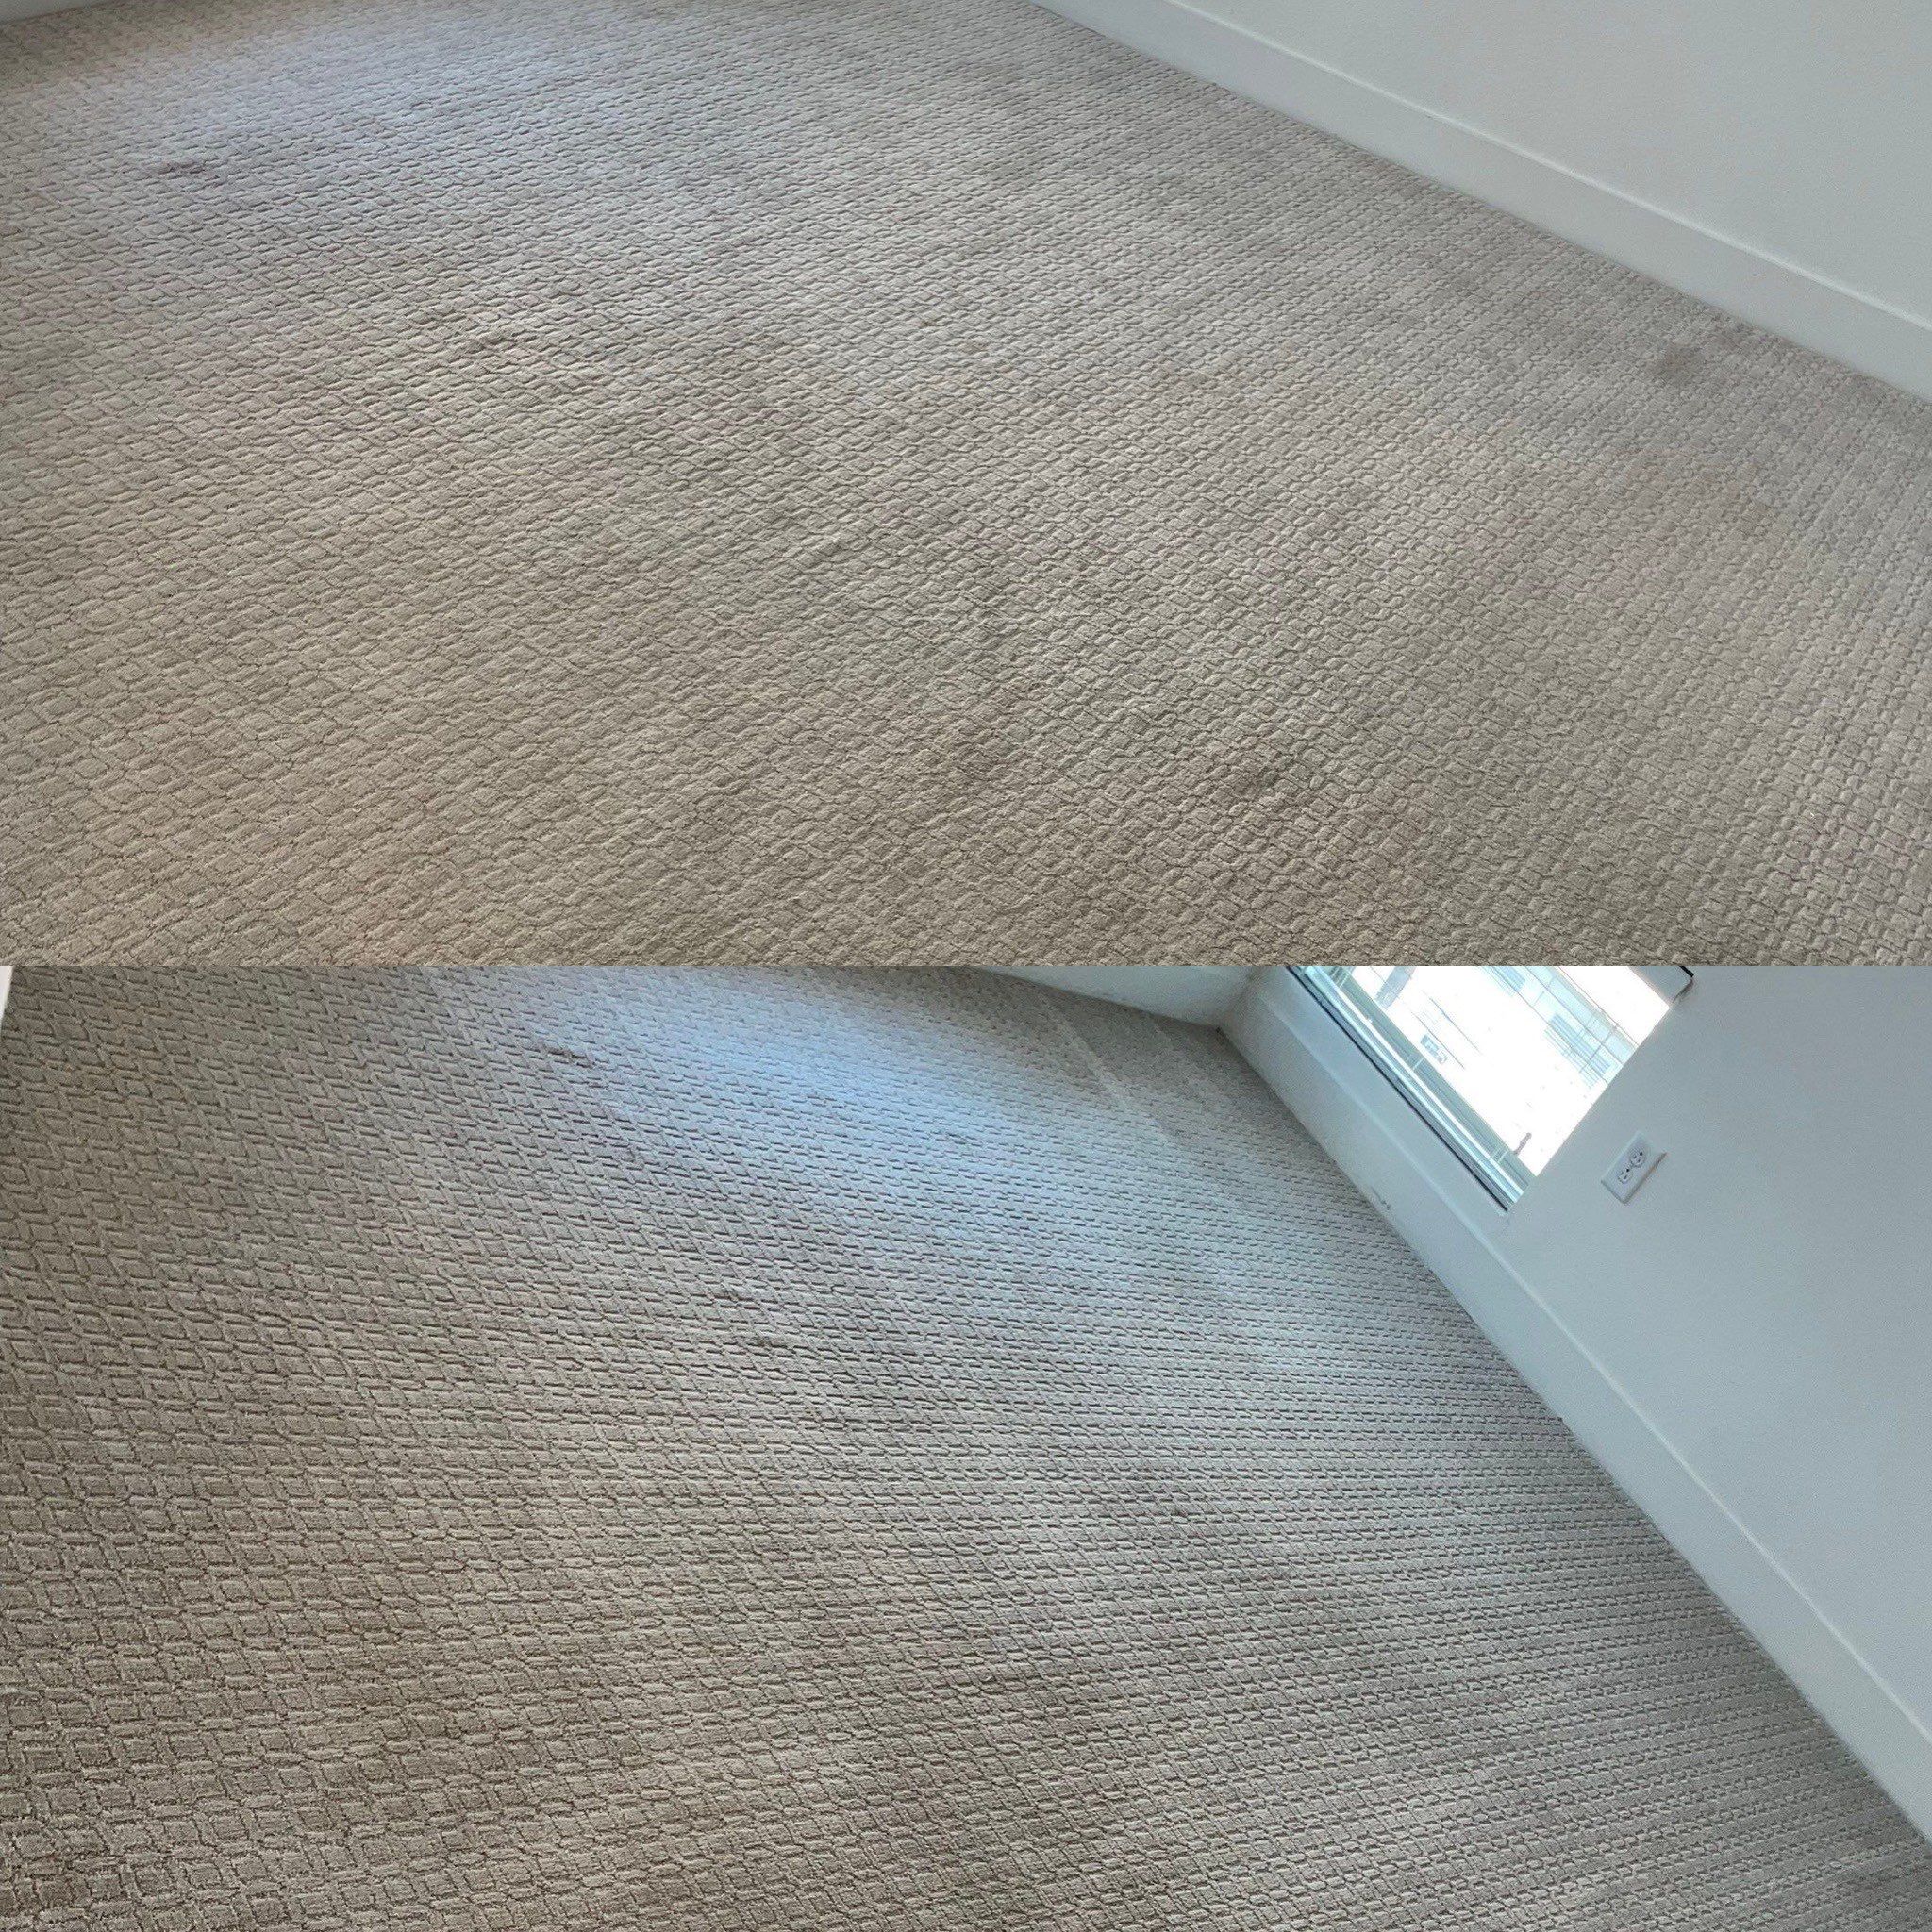 before and after carpet cleaning showing stain removal and overall cleaning of the carpeted floor